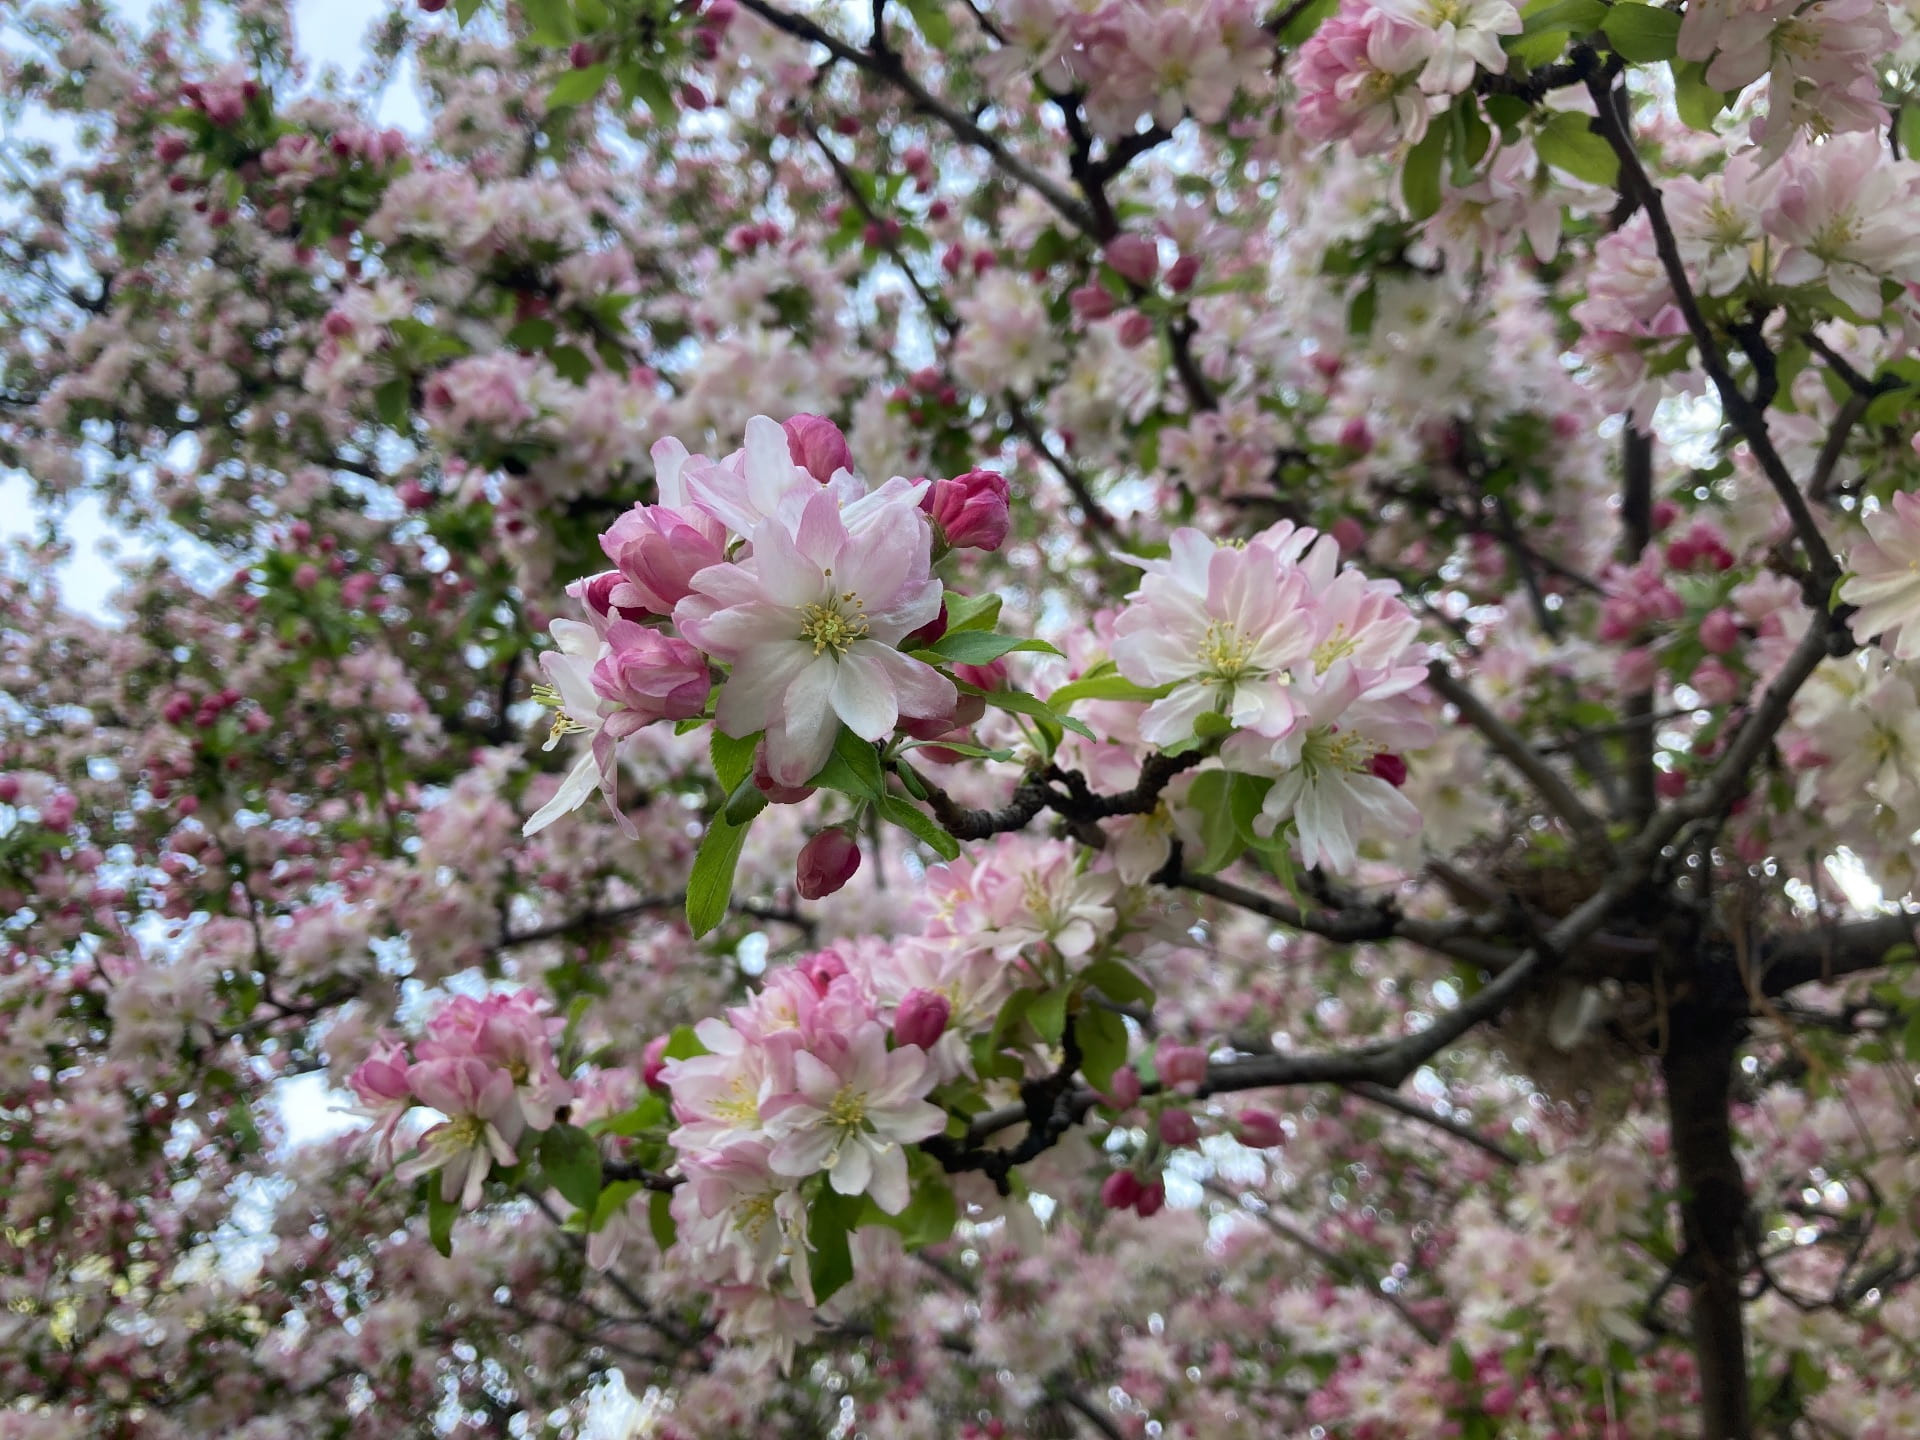 This pink crabapple, Malus cv., is blooming now, creating a pink umbrella over the Picnic Area.